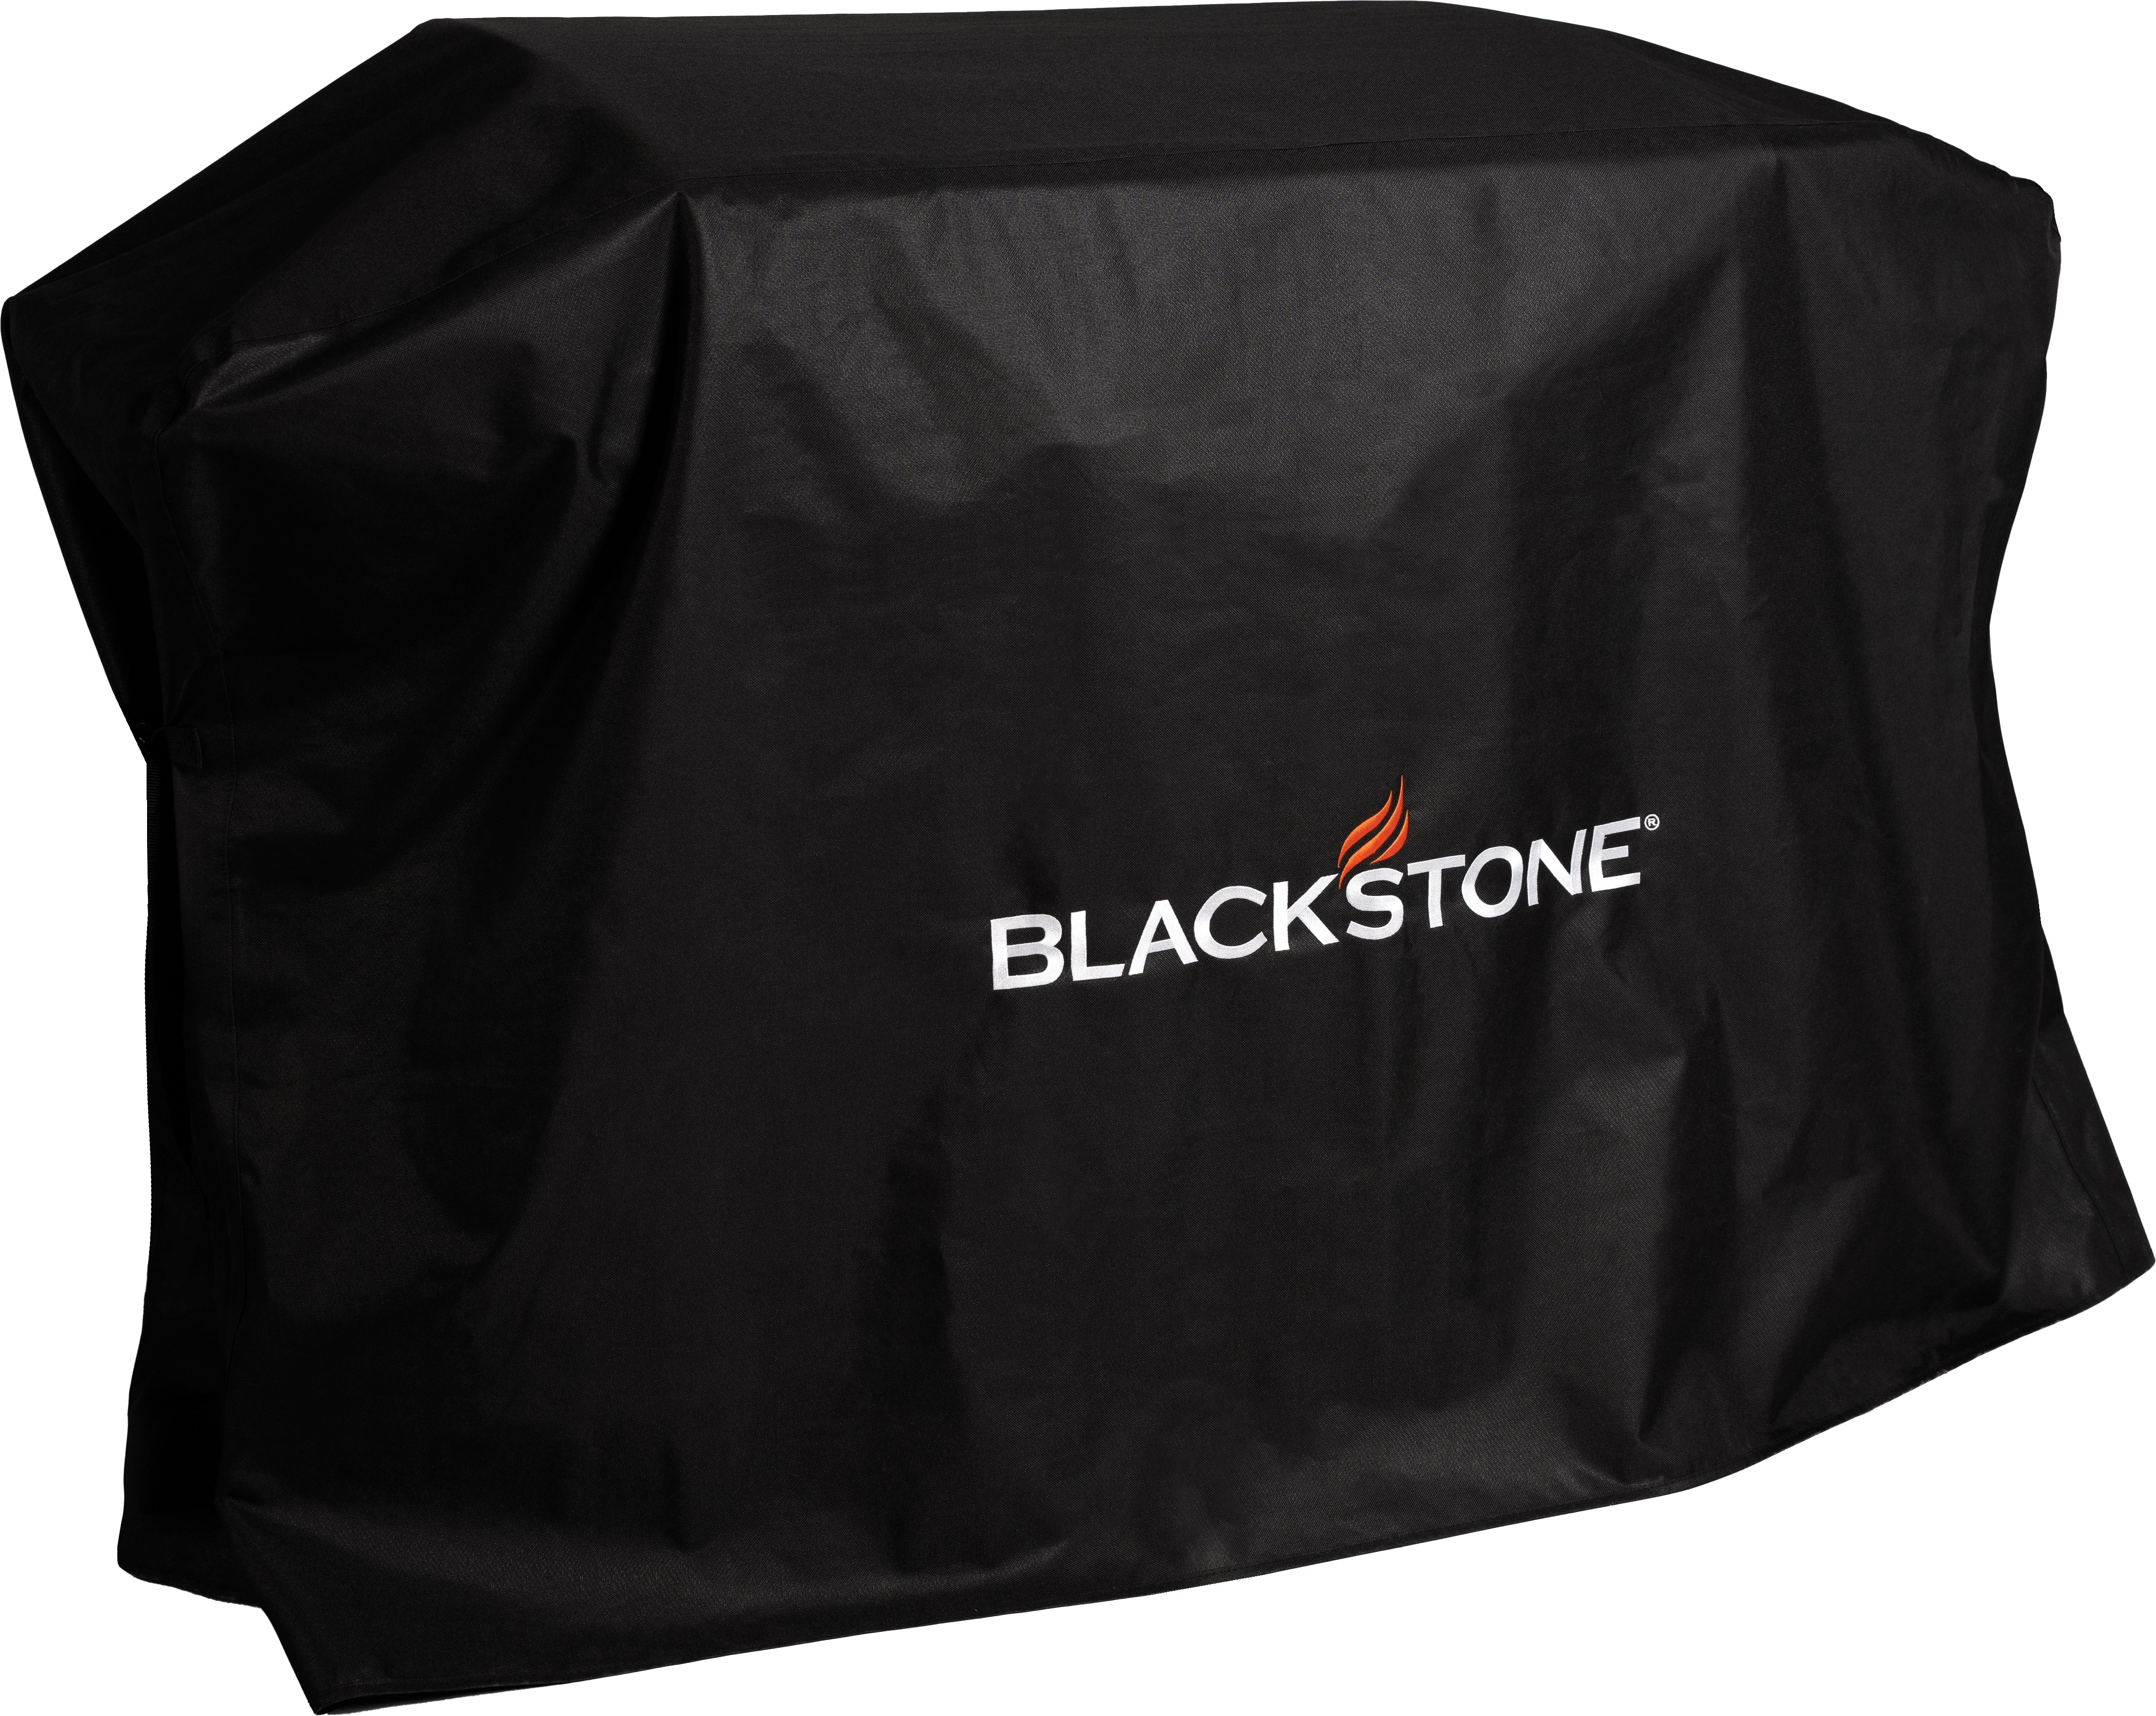 Blackstone - 28" Griddle with Hood Cover - 5483